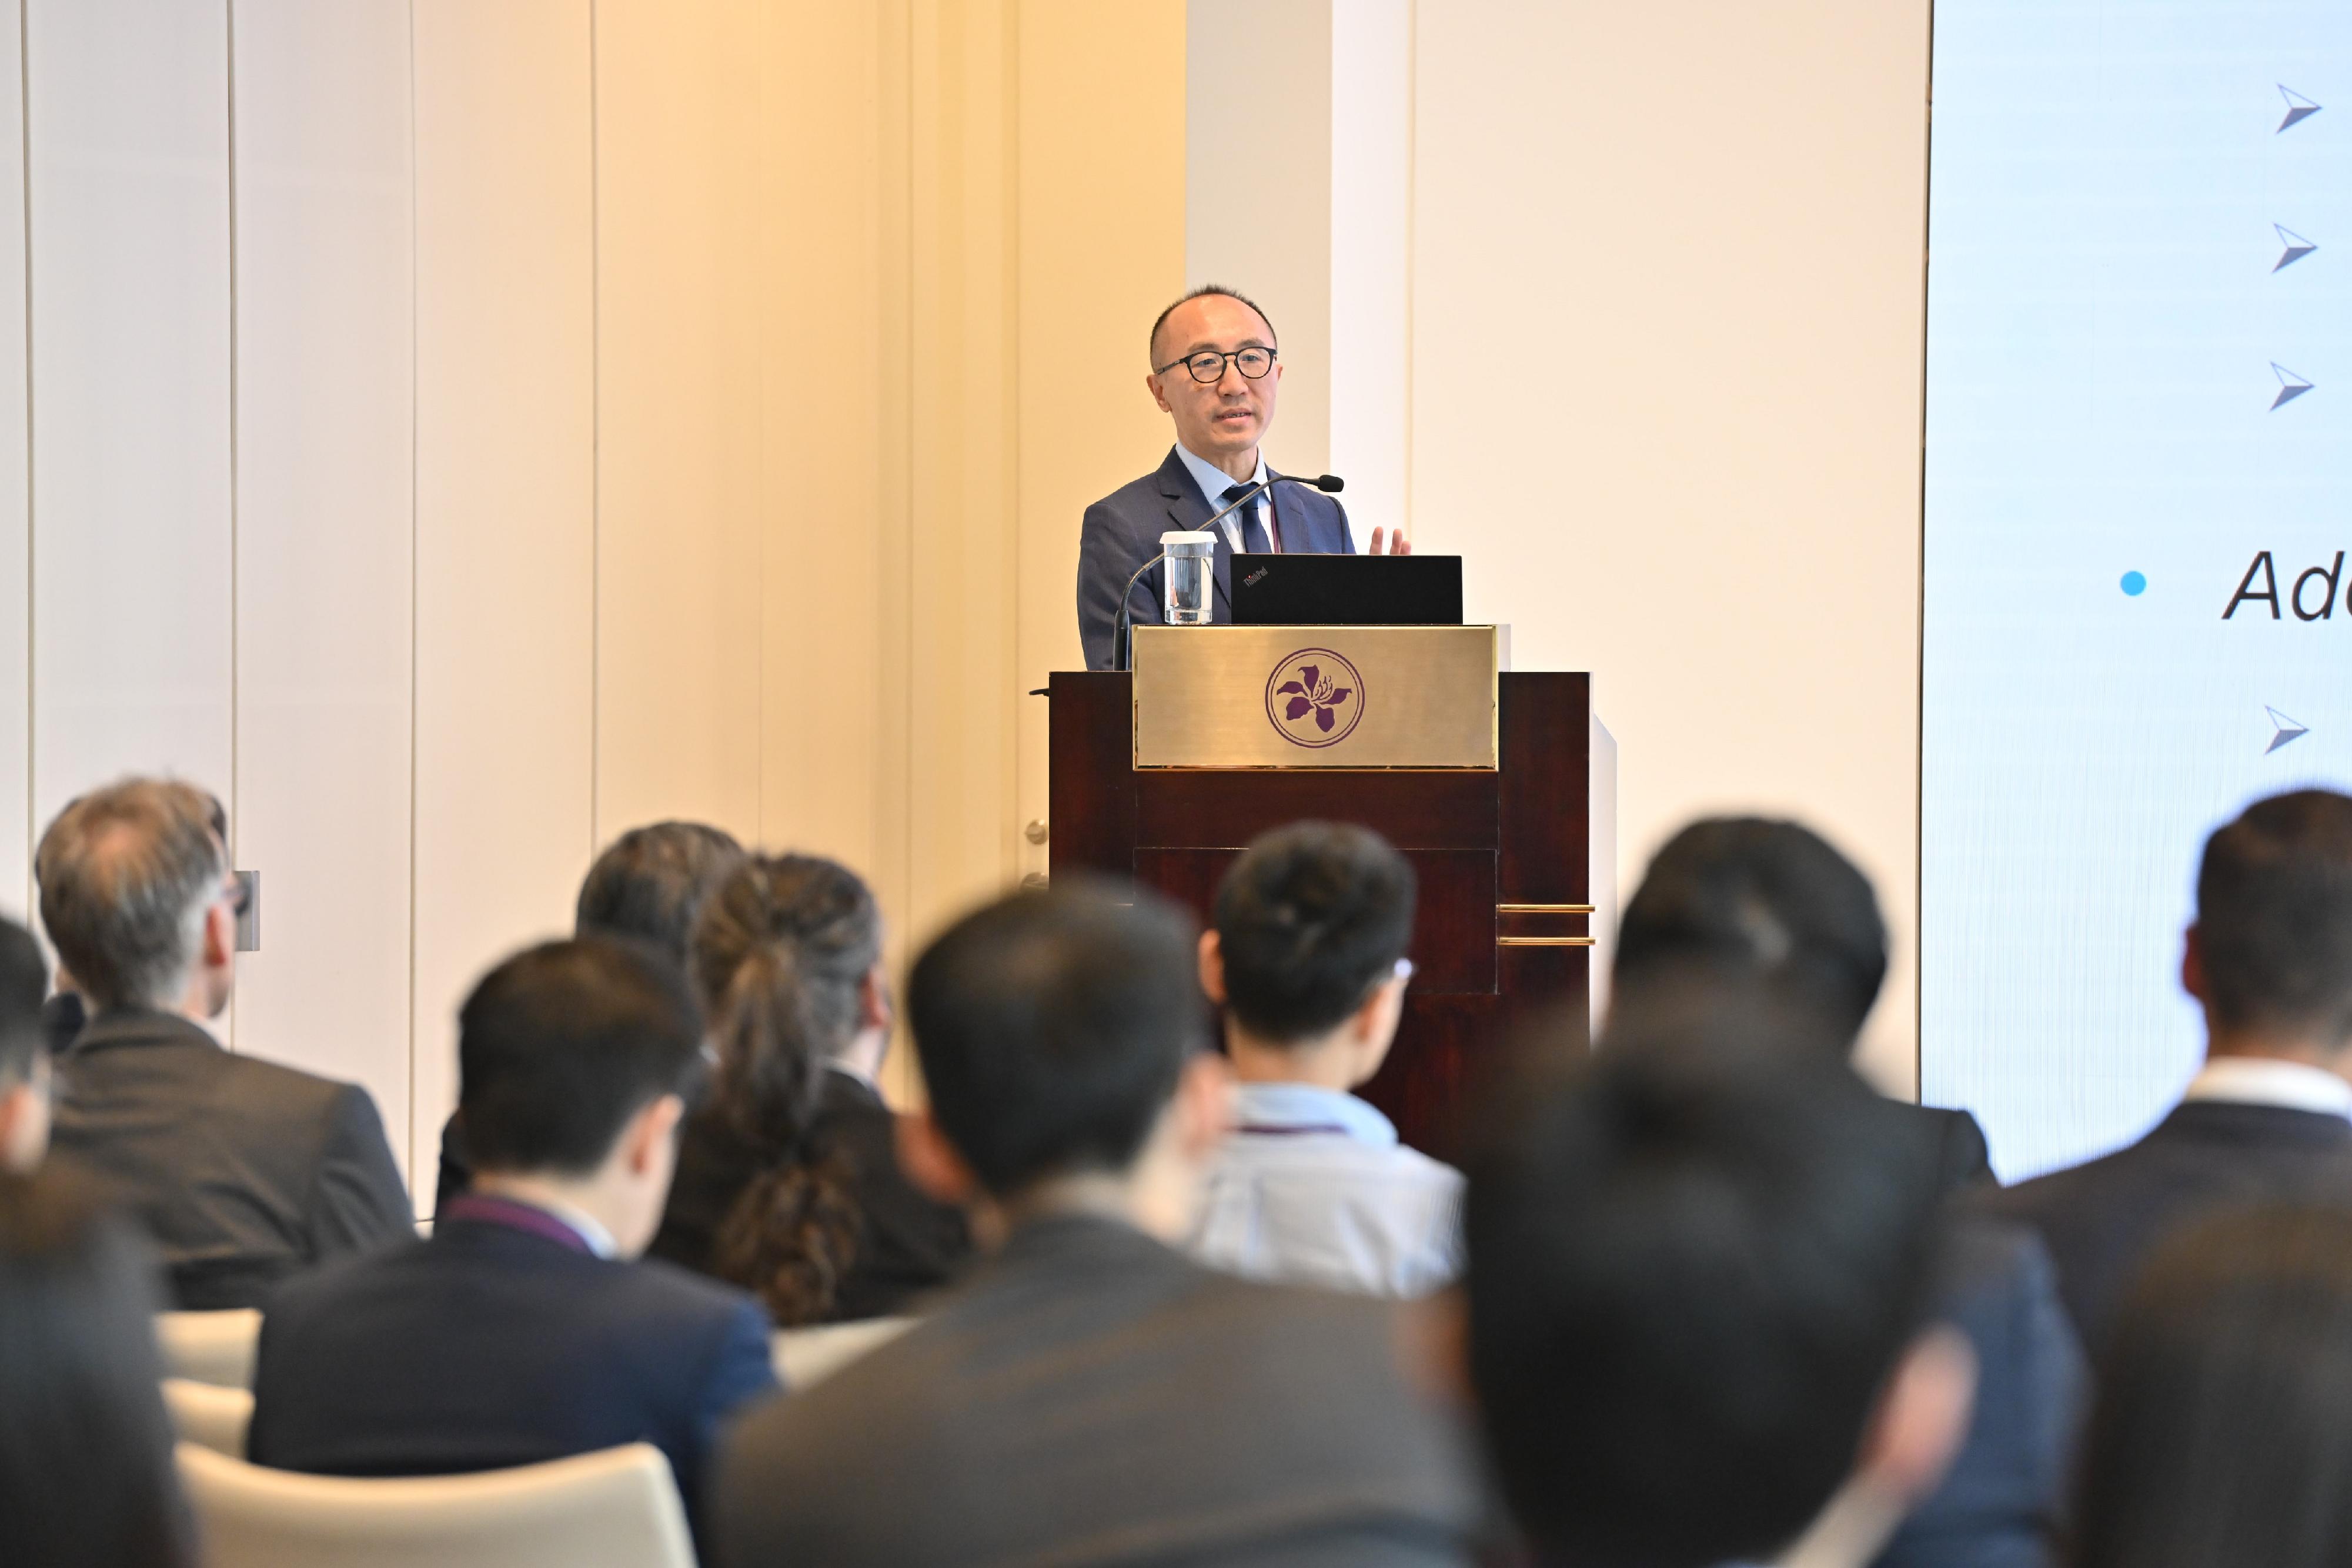 Deputy Director, Monetary and Capital Markets Department of International Monetary Fund, Dr Dong He, delivers a keynote speech for the morning session of the International Conference on Central Bank Digital Currencies and Payment Systems.